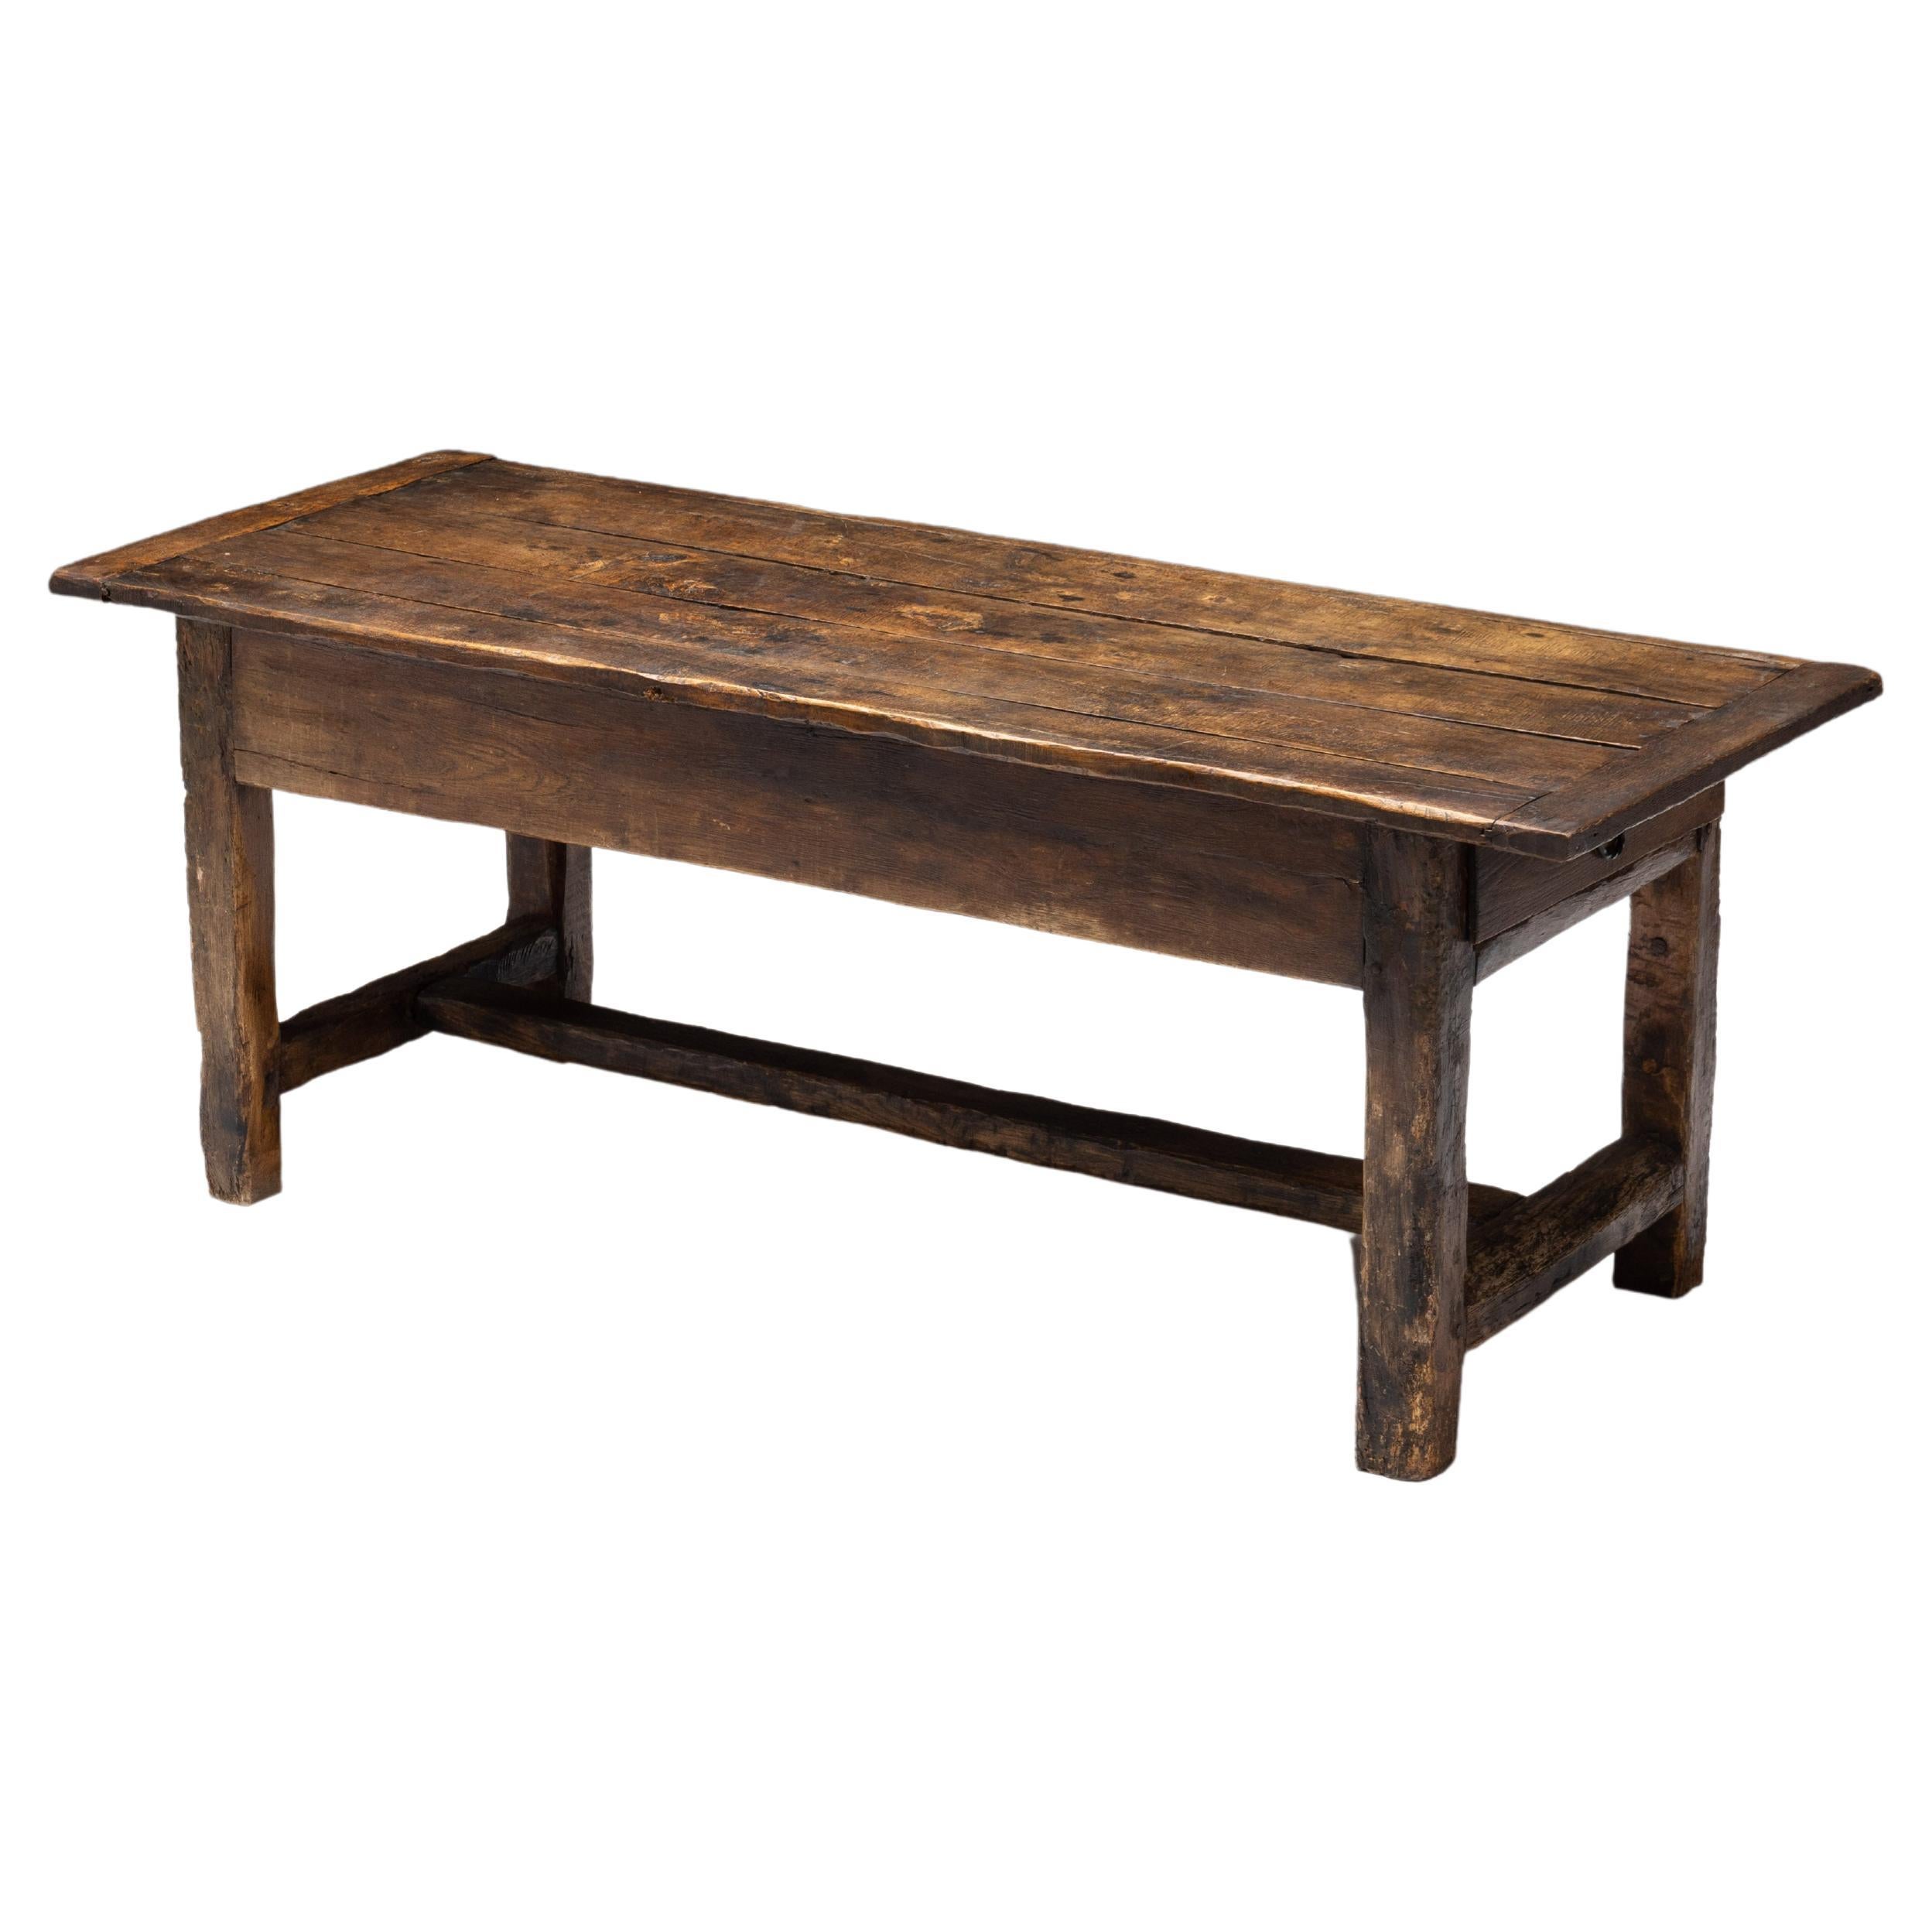 Rustic Folk Art Dining Table, France, 19th Century For Sale